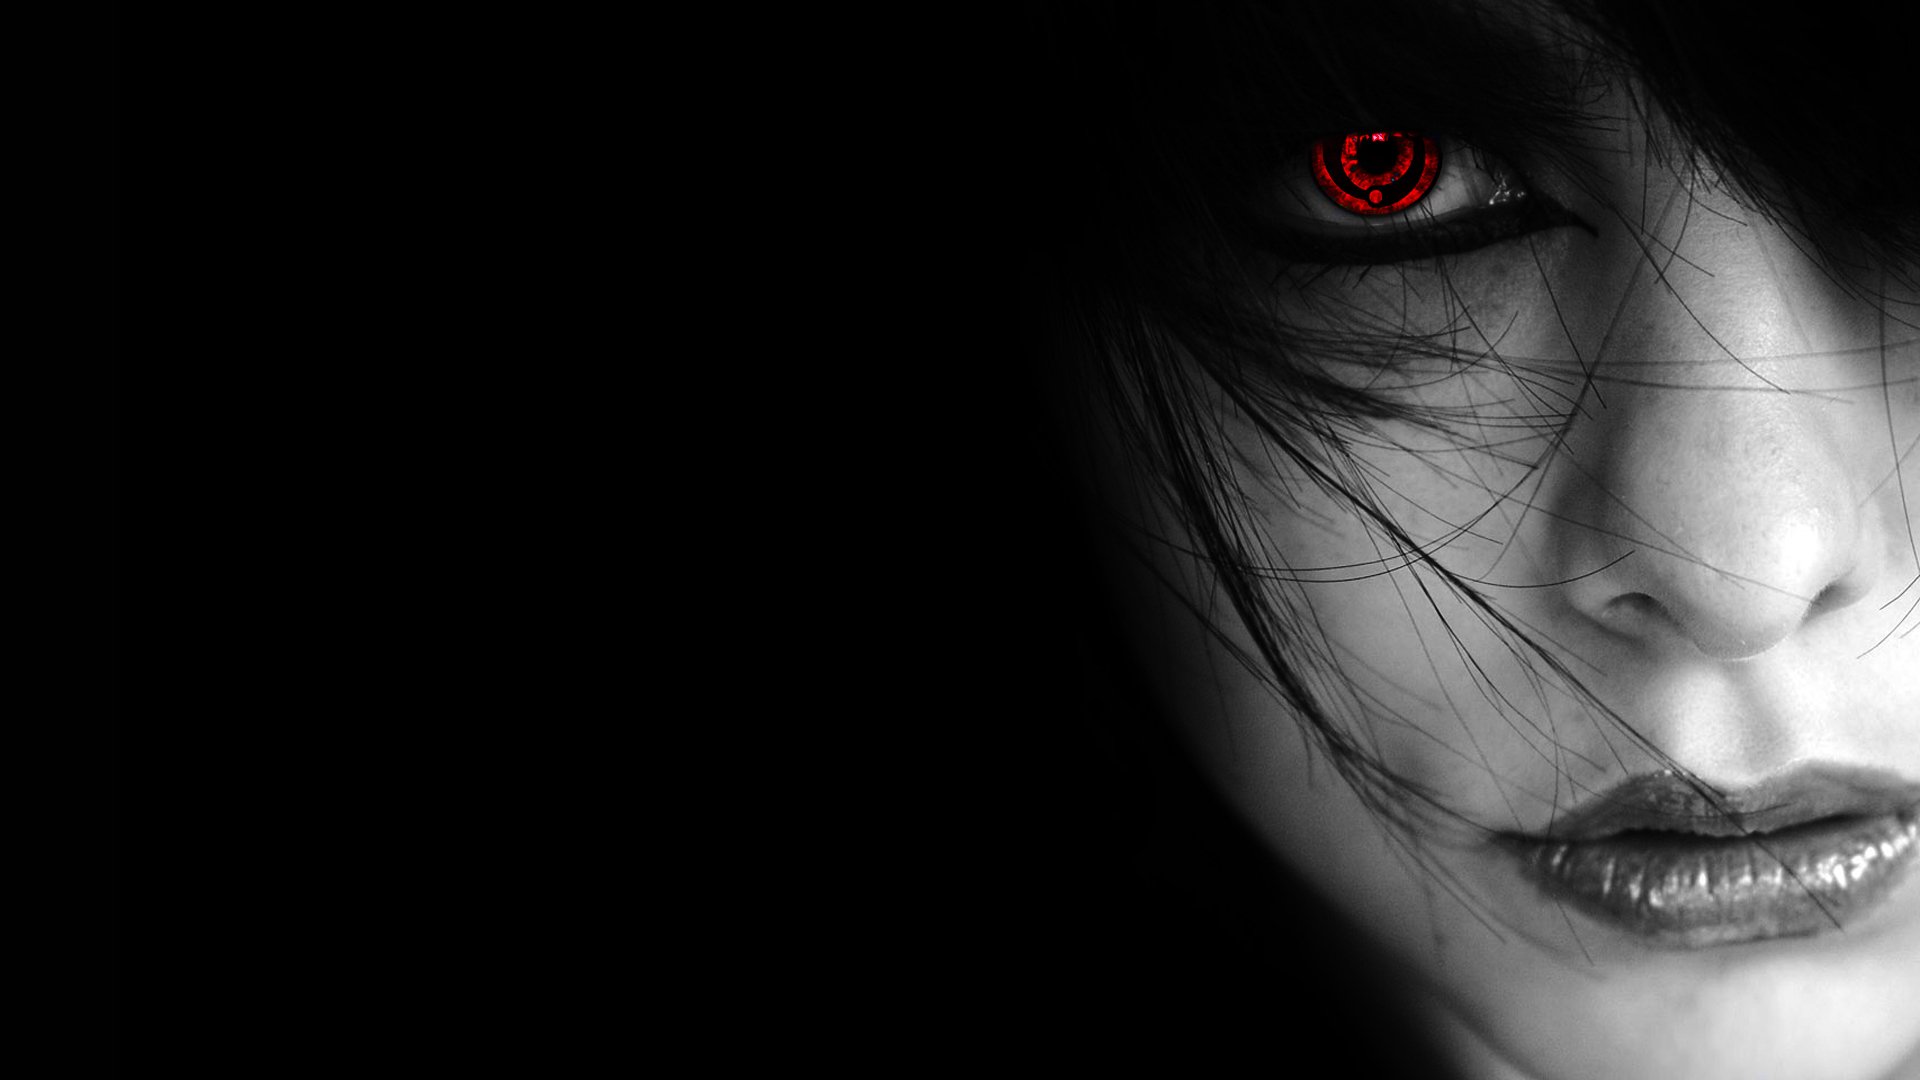 80+ Artistic Dark HD Wallpapers and Backgrounds